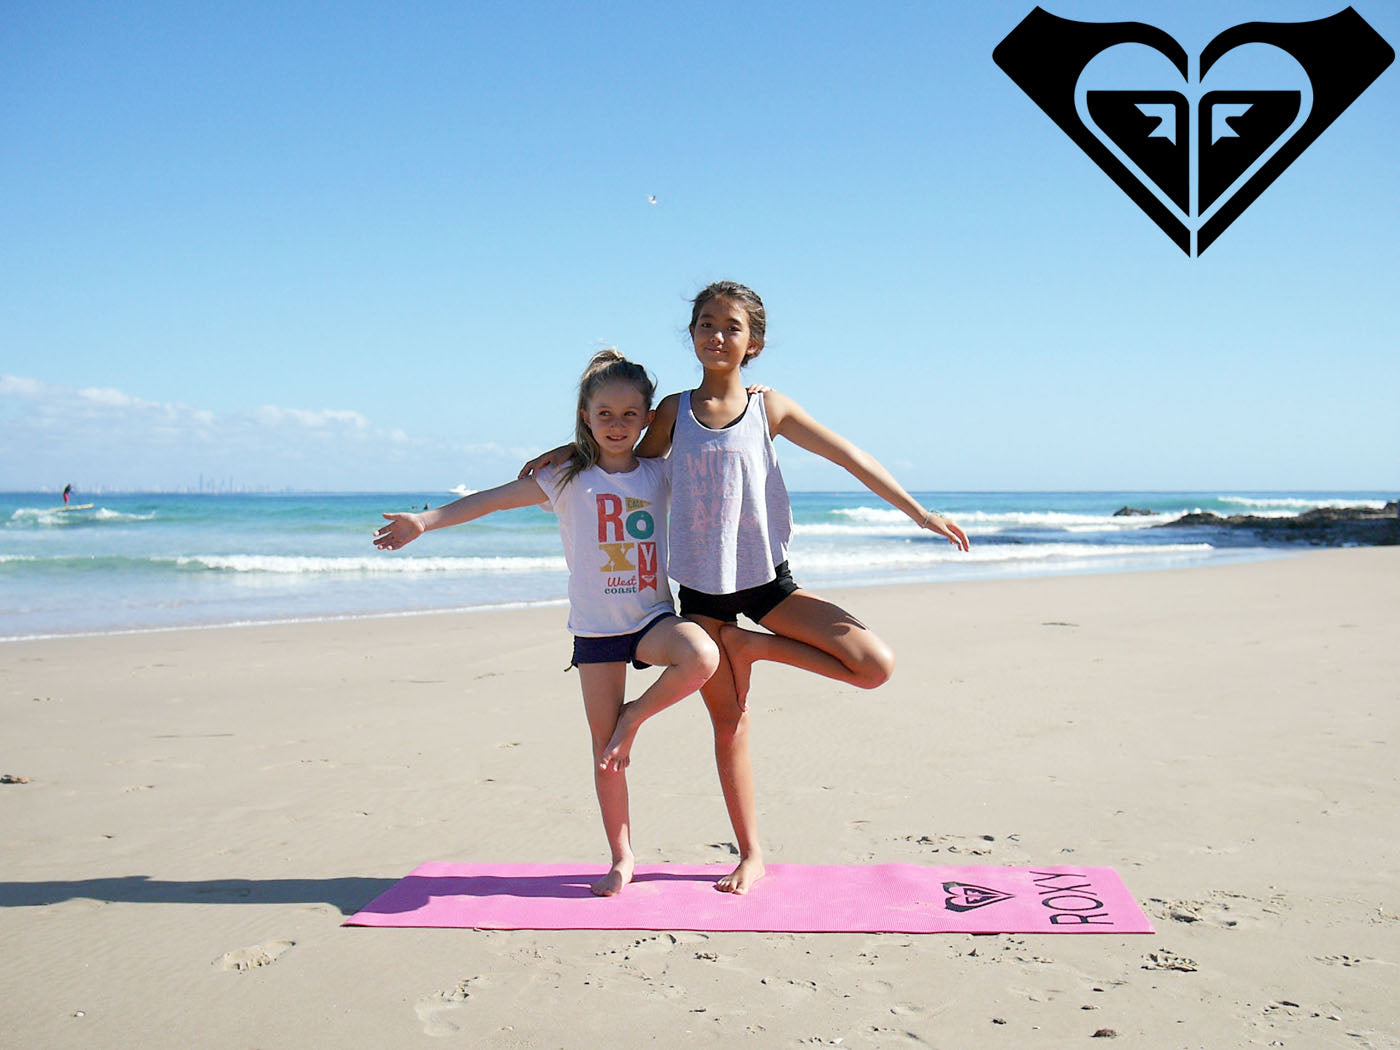 Roxy Surf Summer 2017 Young Girls Tees & Hoodies Collection